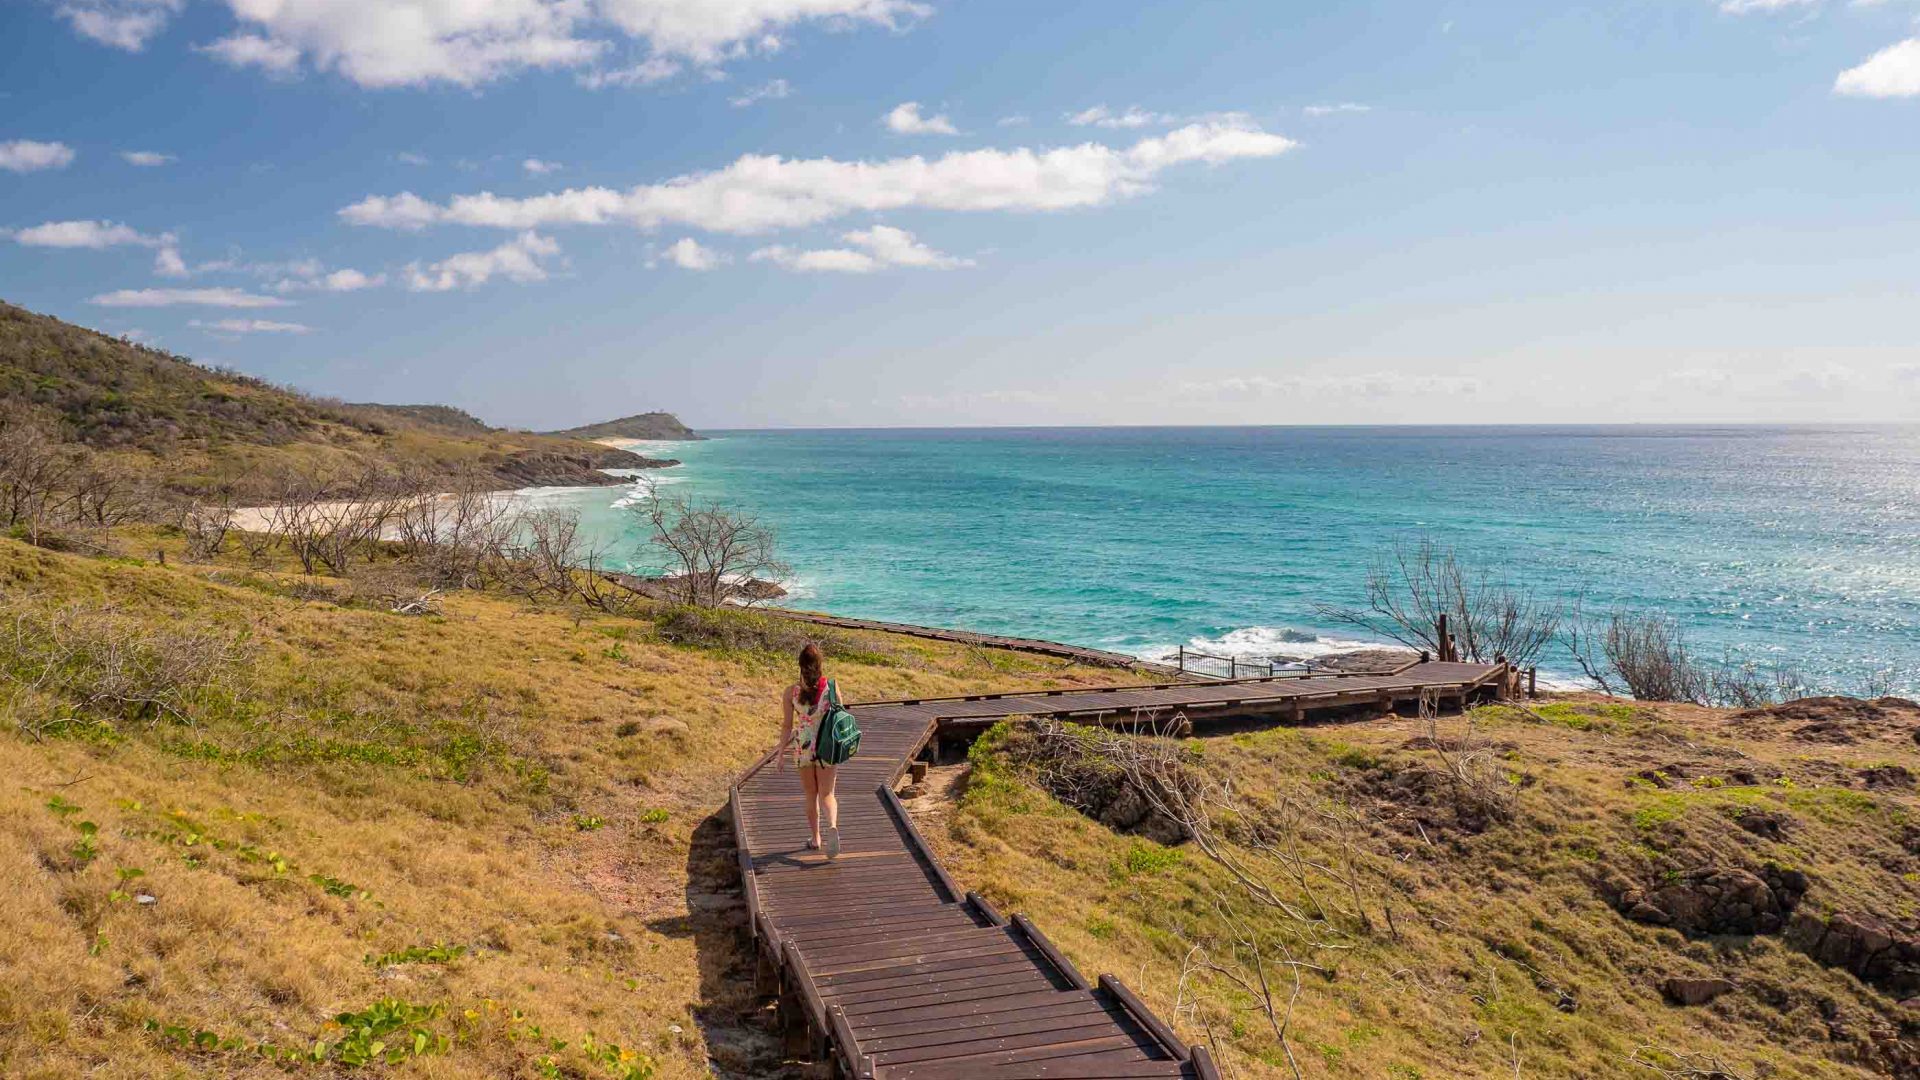 Conservation, adventure and wildlife? Fraser Island is in a league of its own